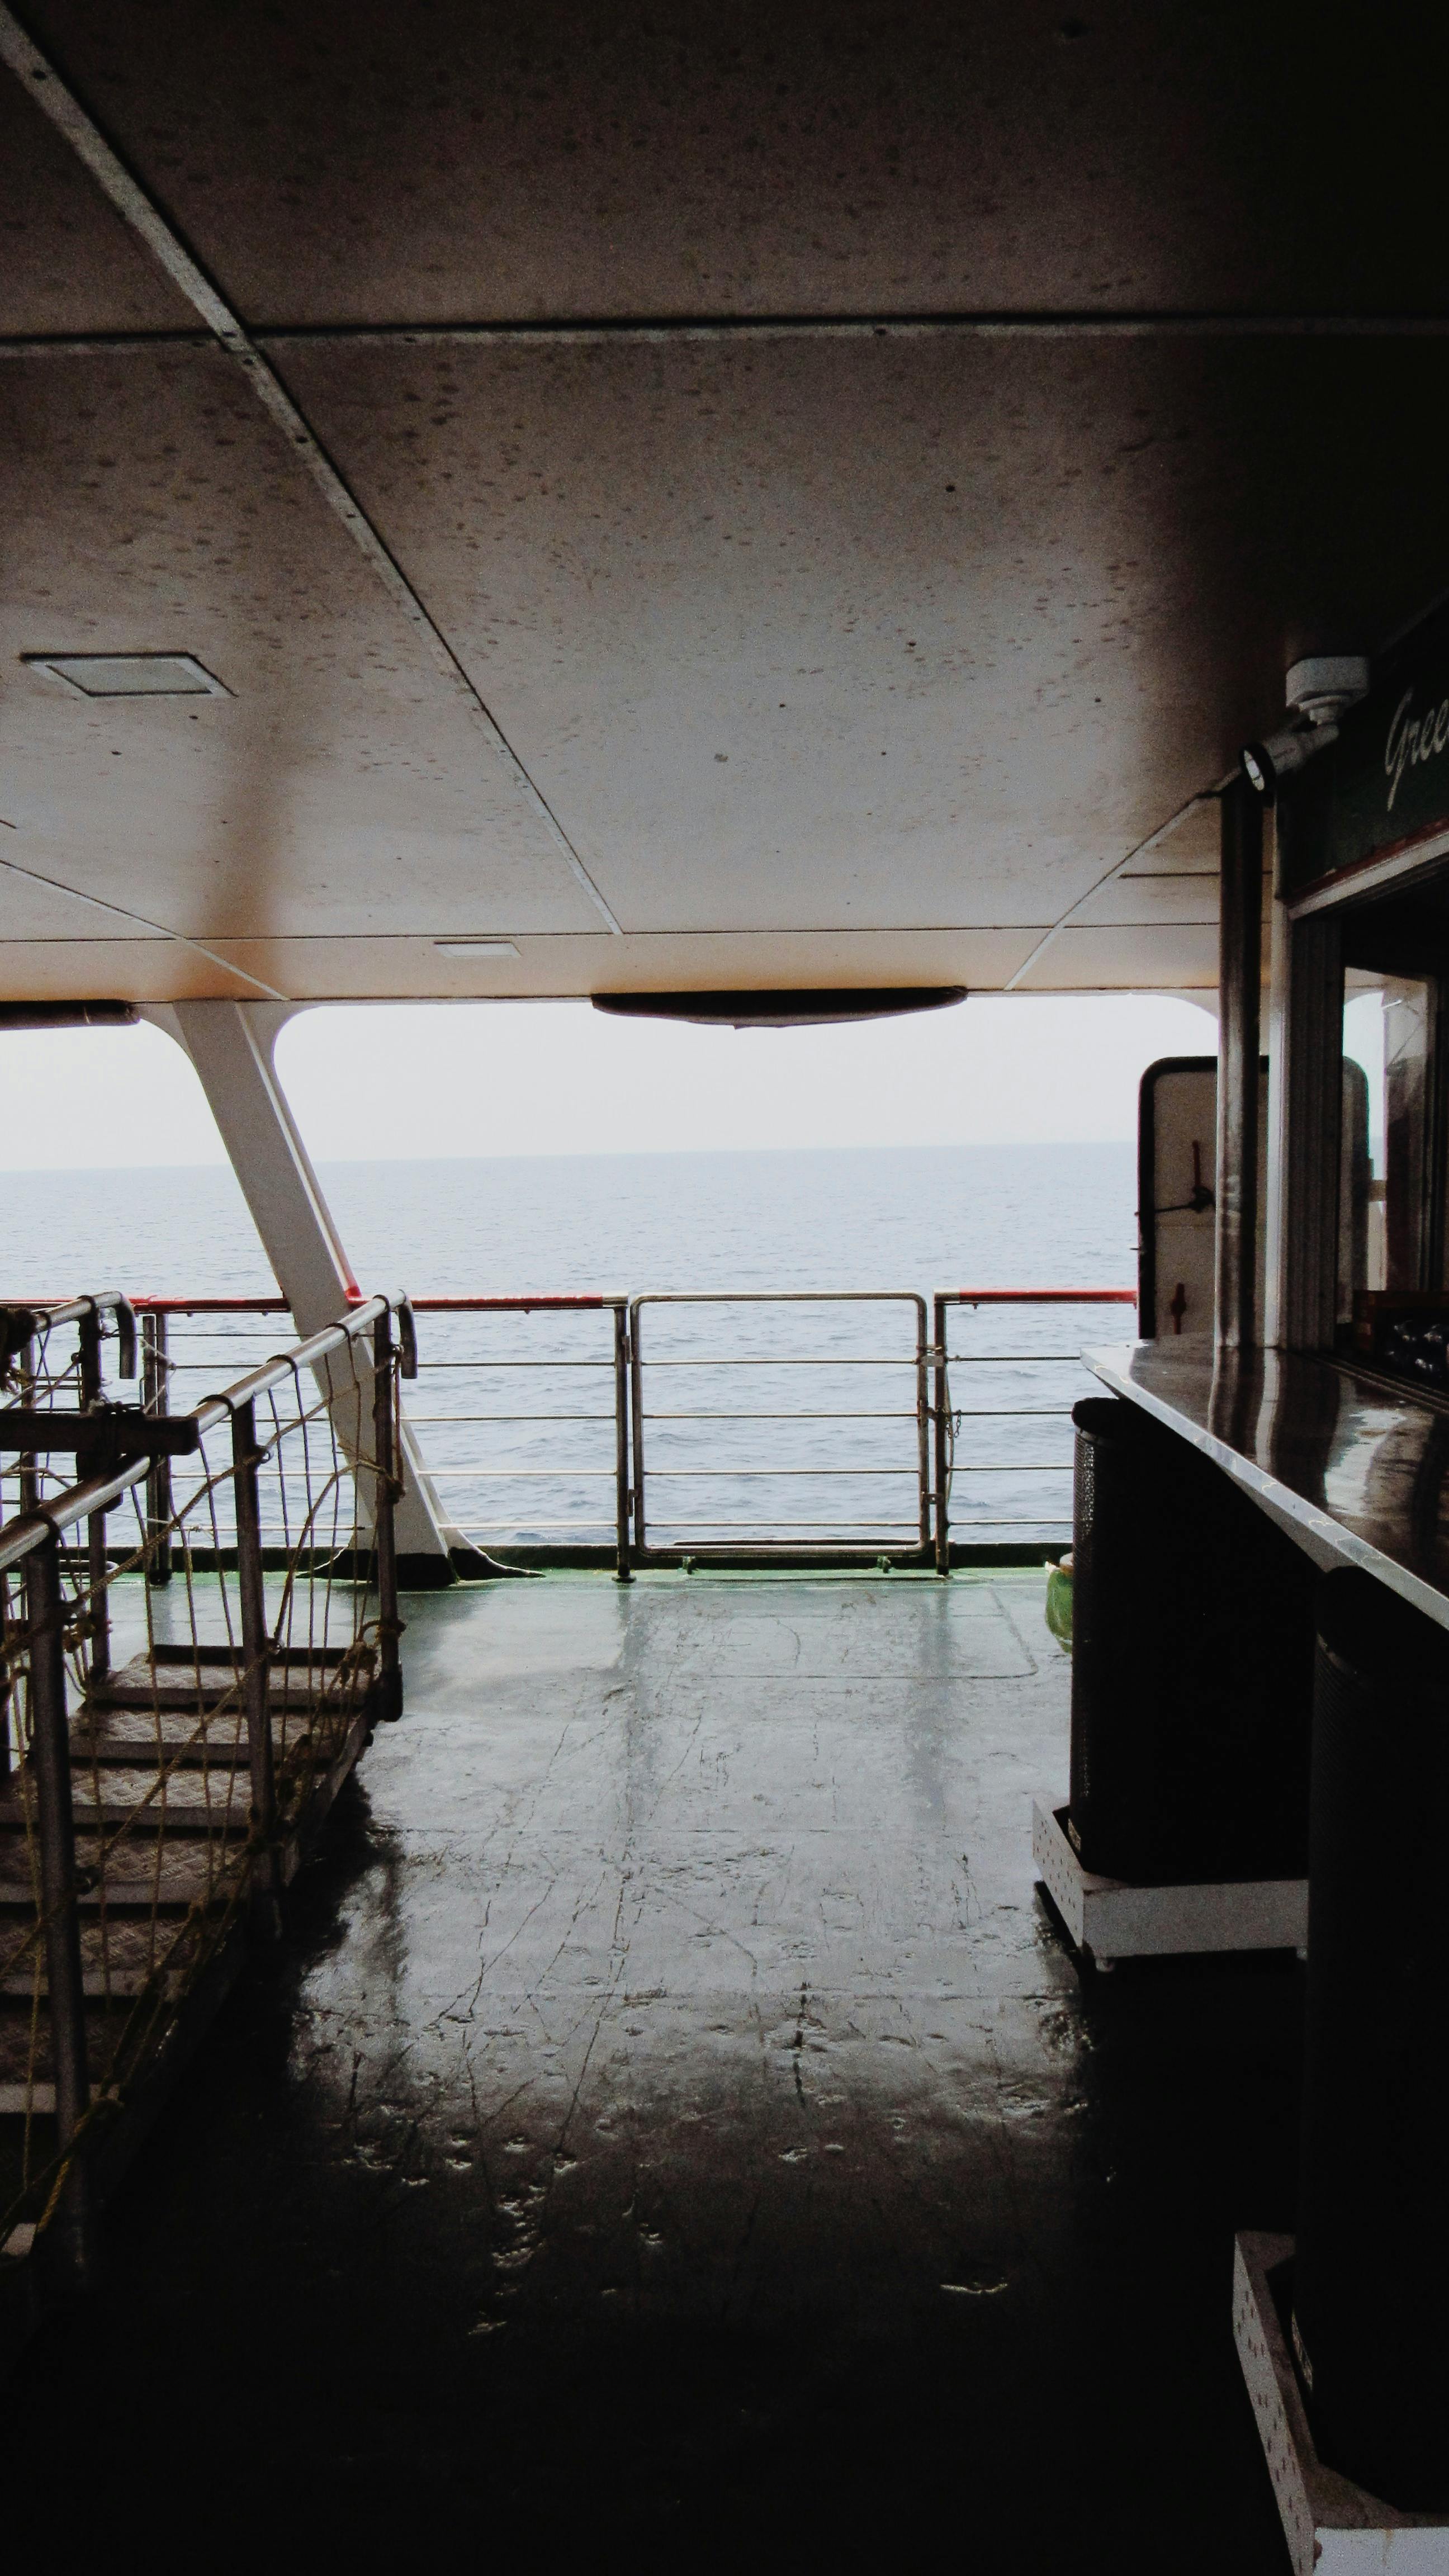 a view of the ocean from the deck of a ship